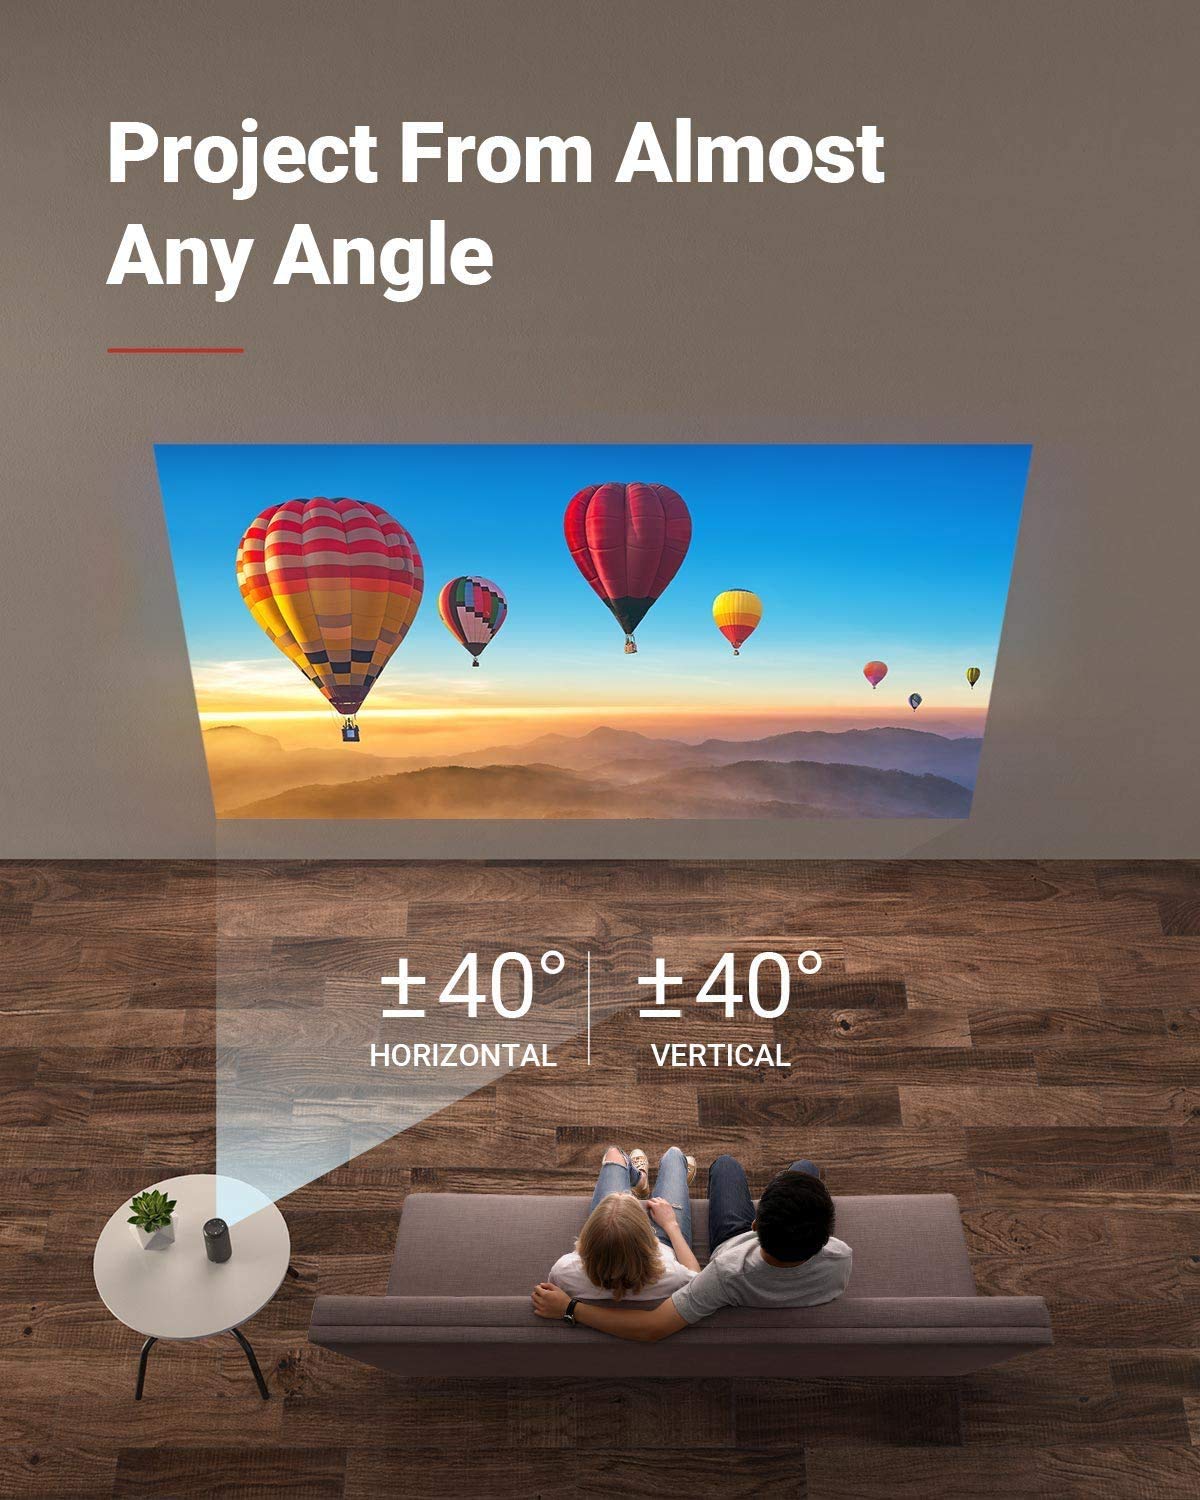 Anker NEBULA Capsule Max, Mini Projector with WiFi and Bluetooth, Small Projector, 200 ANSI Lumen, Projector Portable, Native 720p HD, 8W Speaker, 100 Inch Picture, 4Hr Video Playtime, Home Theater